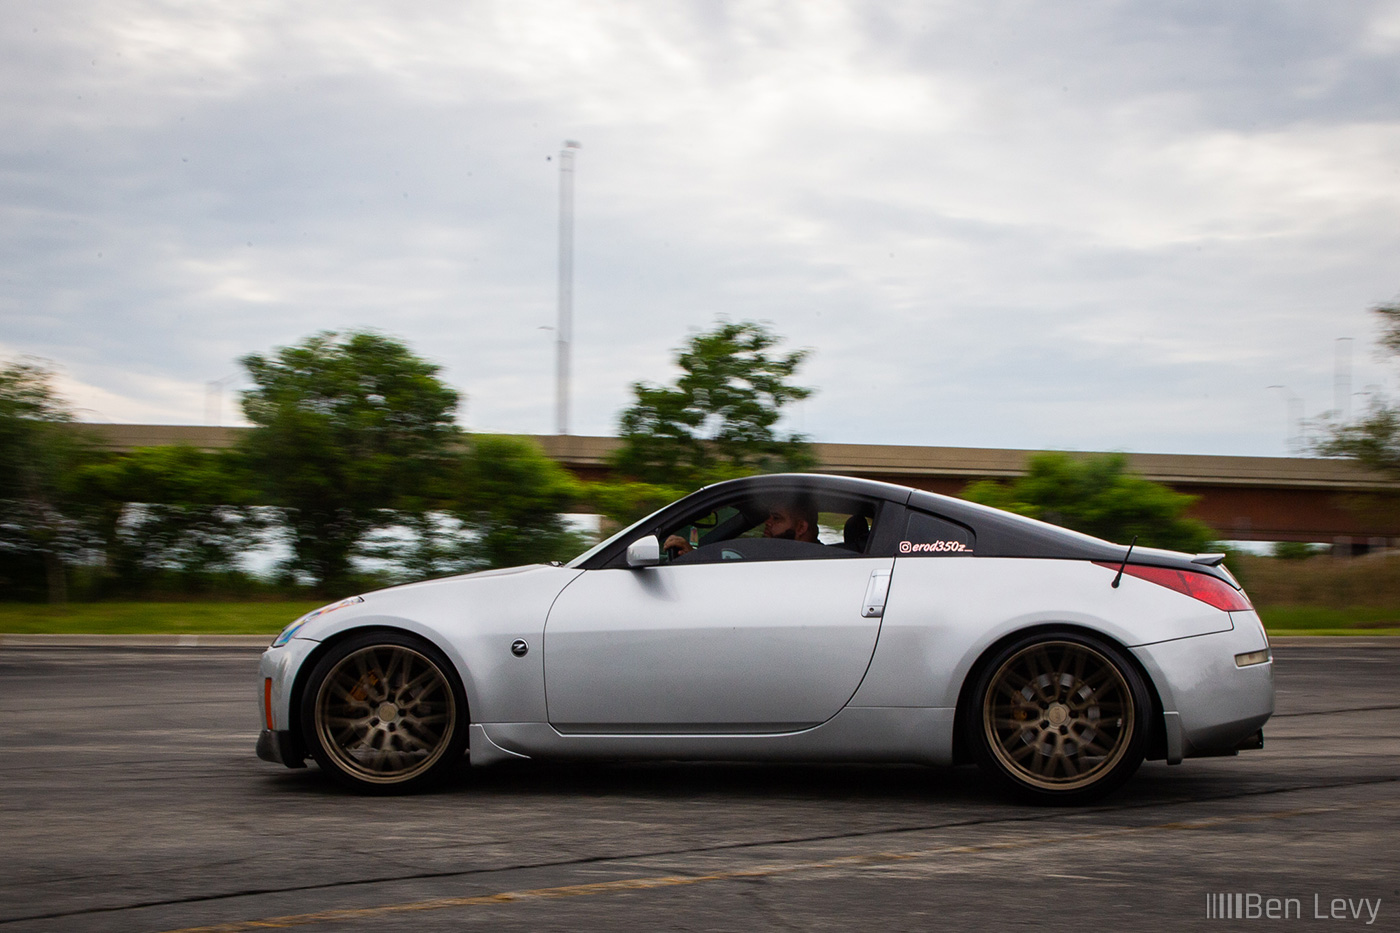 Silver Nissan 350Z with Black Roof